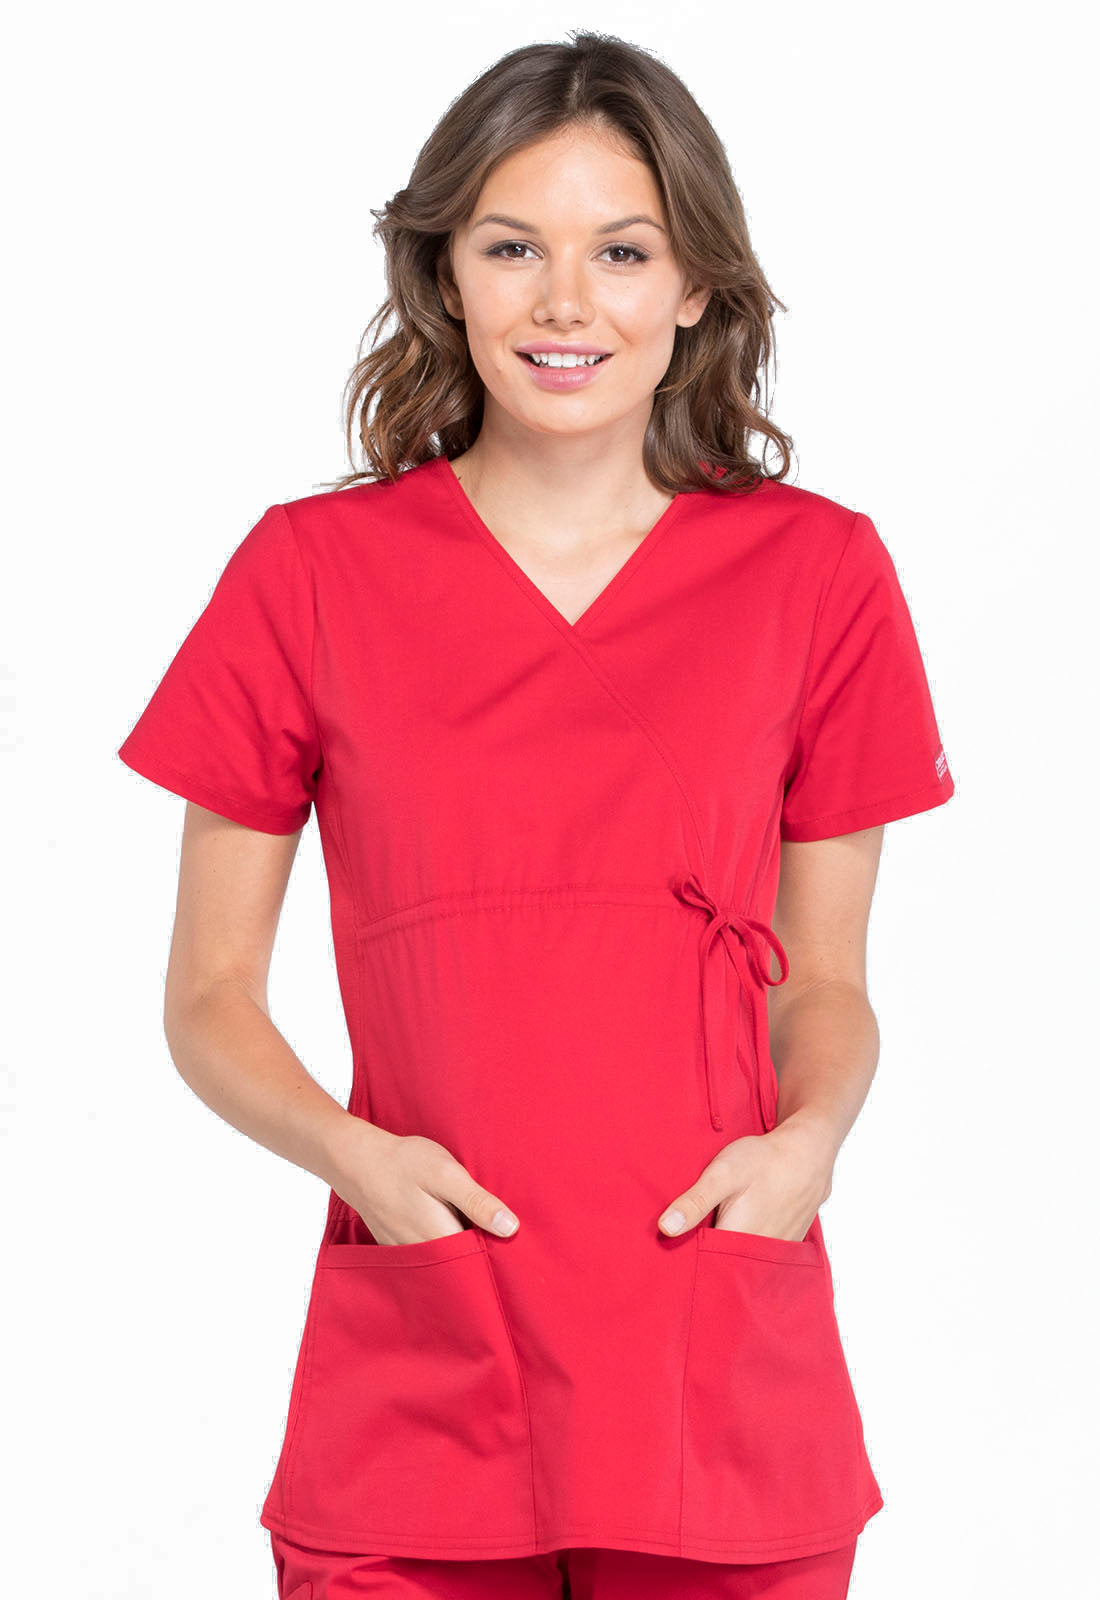 White Cherokee Workwear Professionals Maternity Mock Wrap Top (11 Colors)